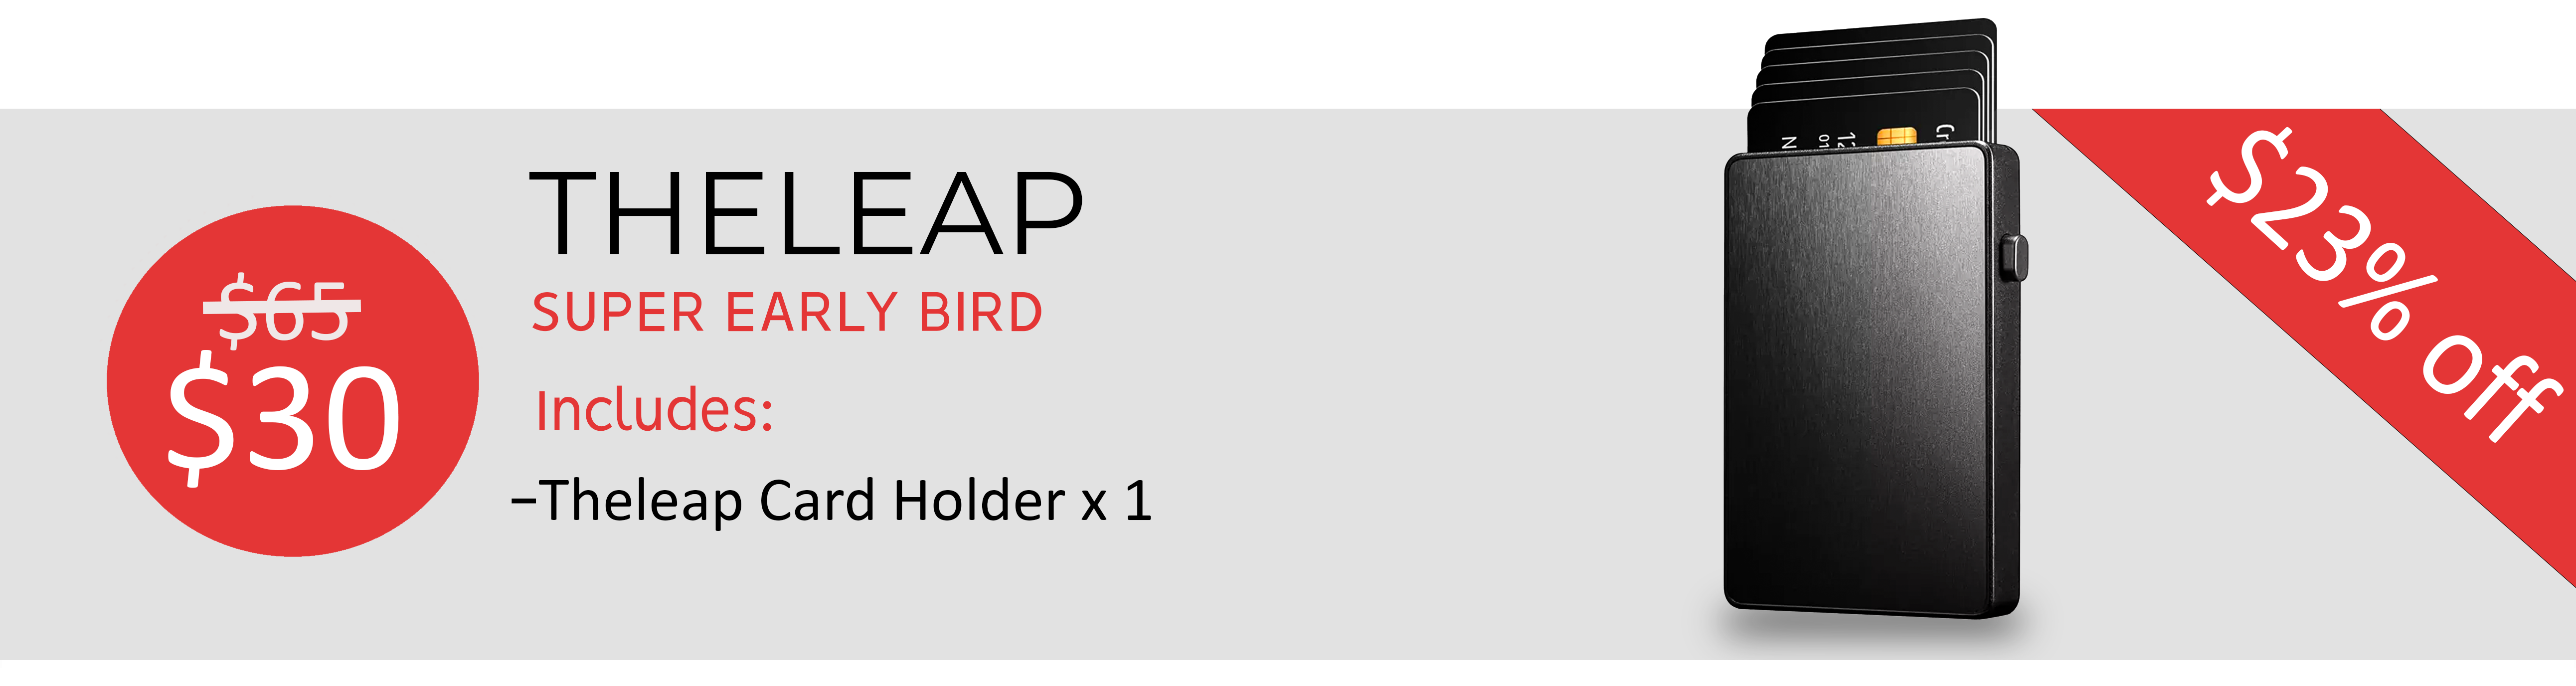 Super Early Bird 1 Leap wallet. With 23% discount on MSRP